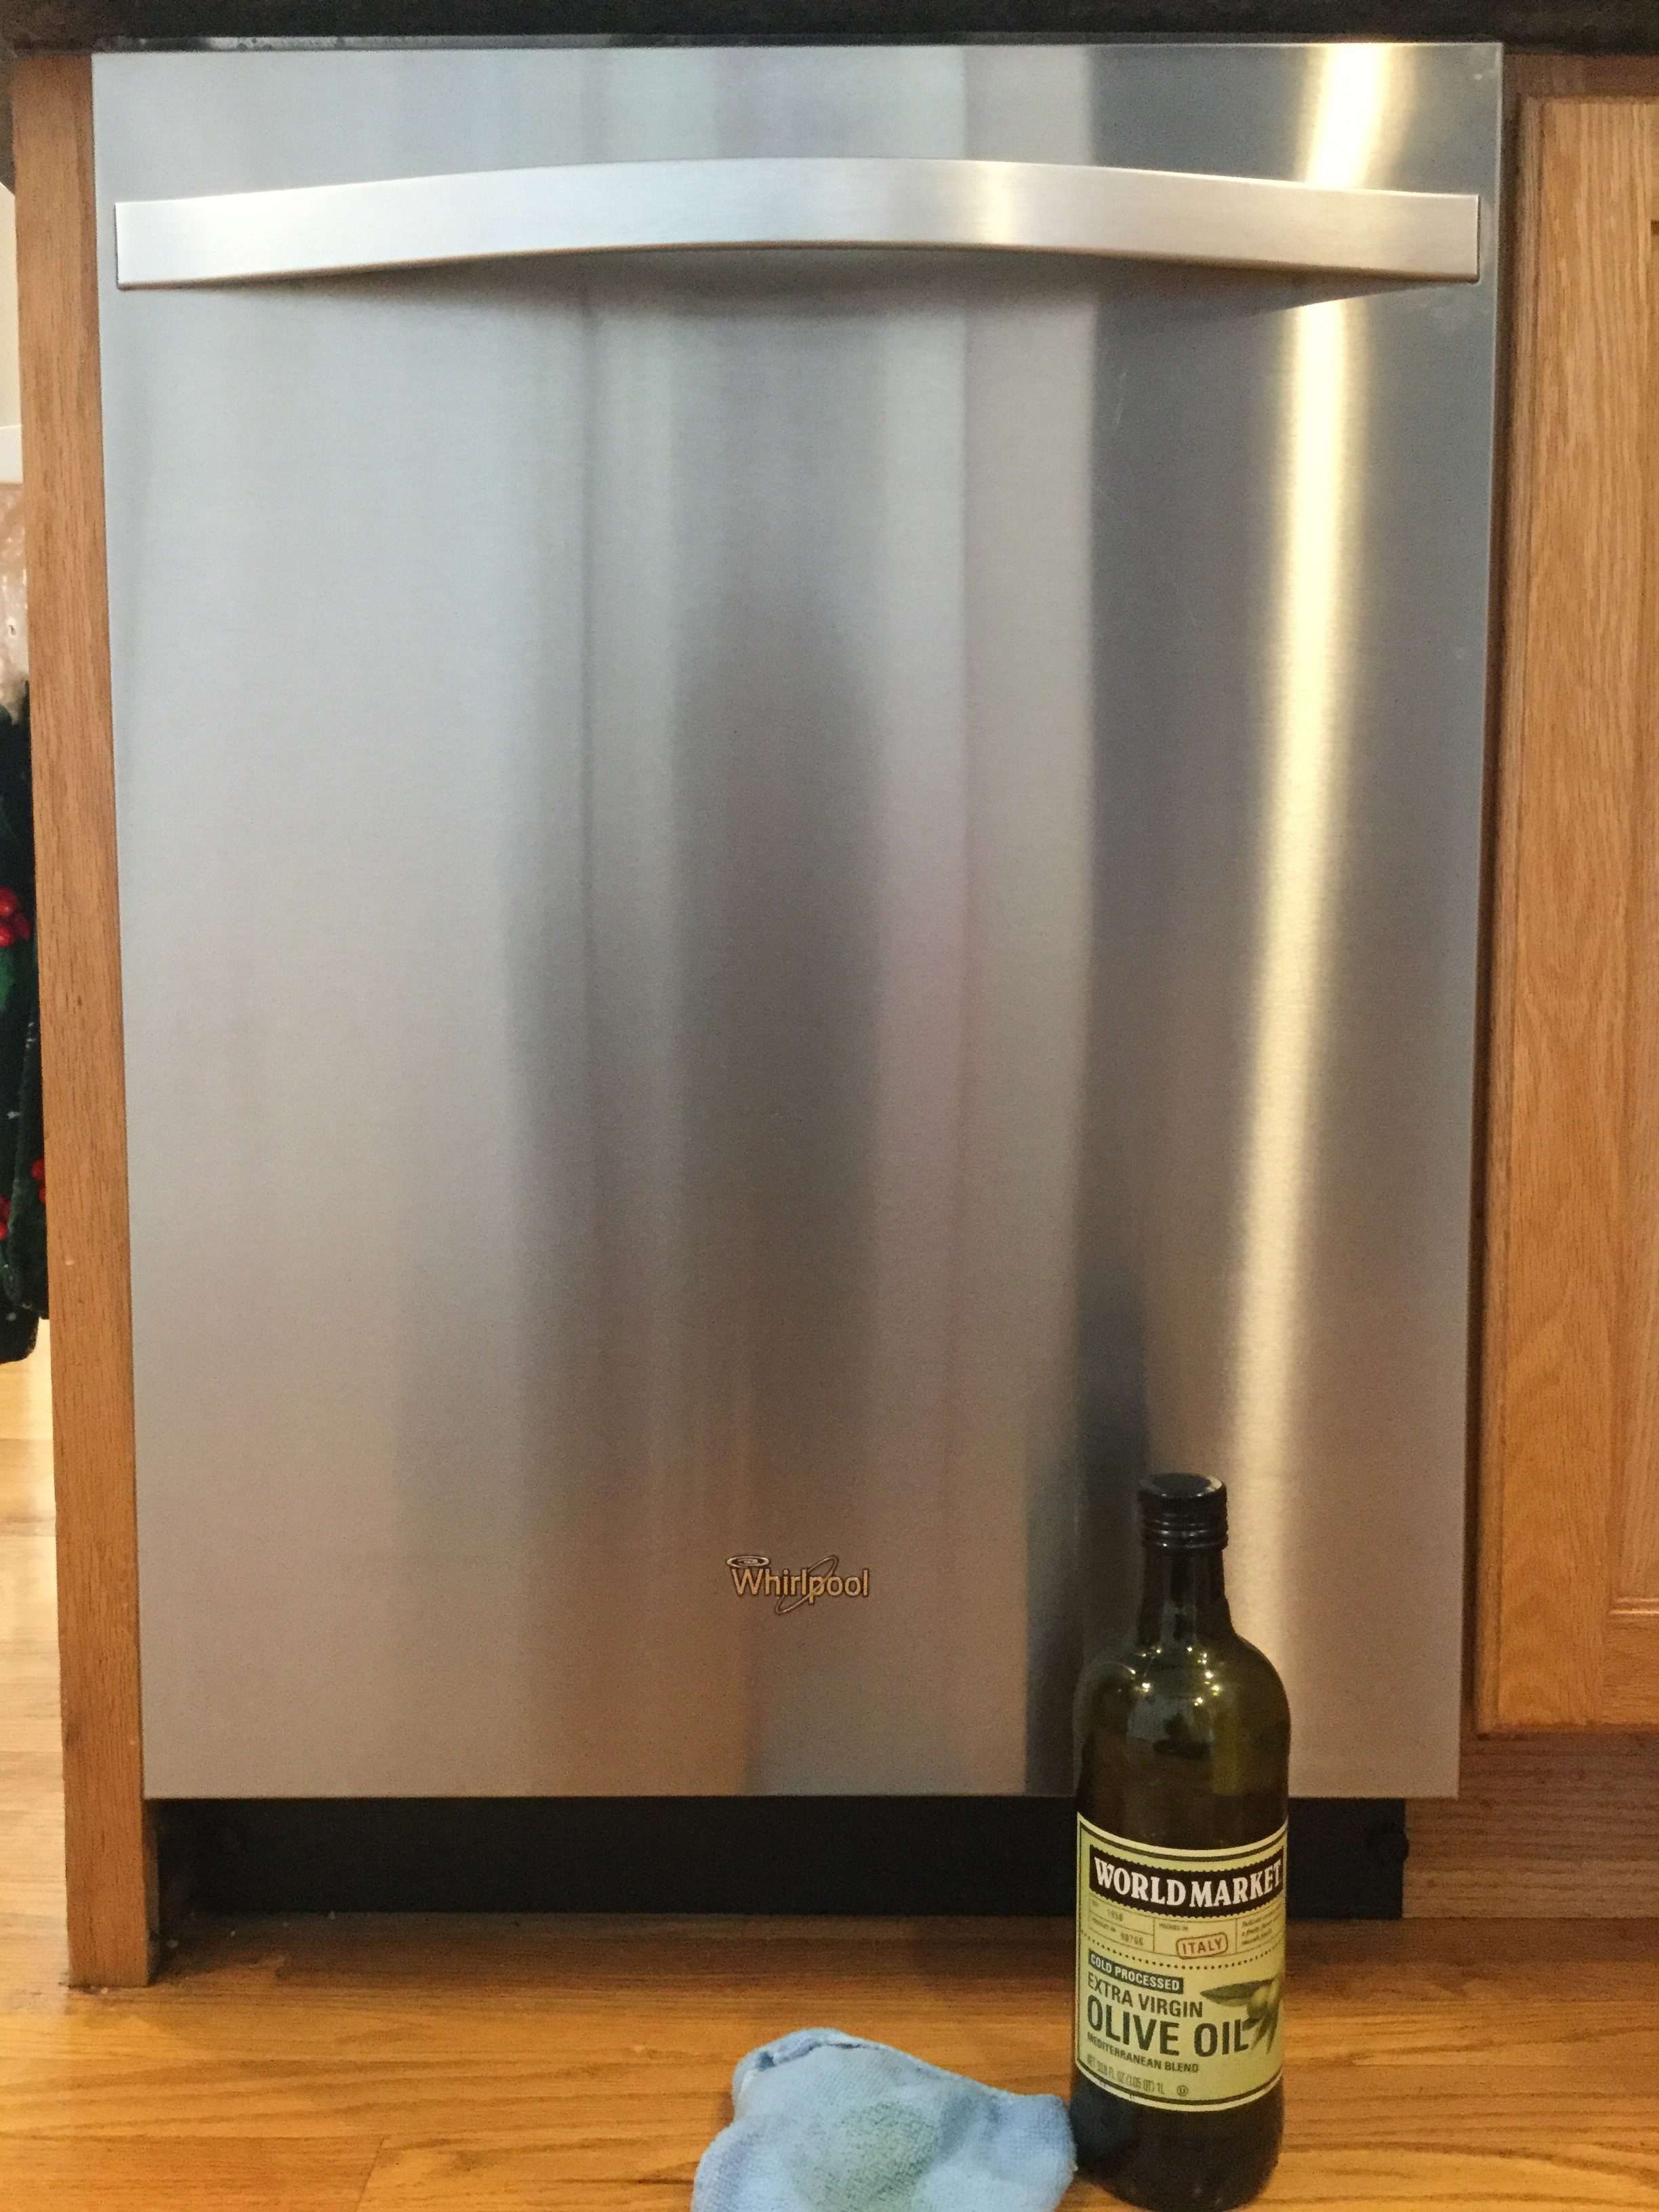 Stainless Steel is dry and needs to be moisturized. Using olive oil on a clean microfiber cloth, wipe with the grain of the stainless steel on your appliances after you clean them.